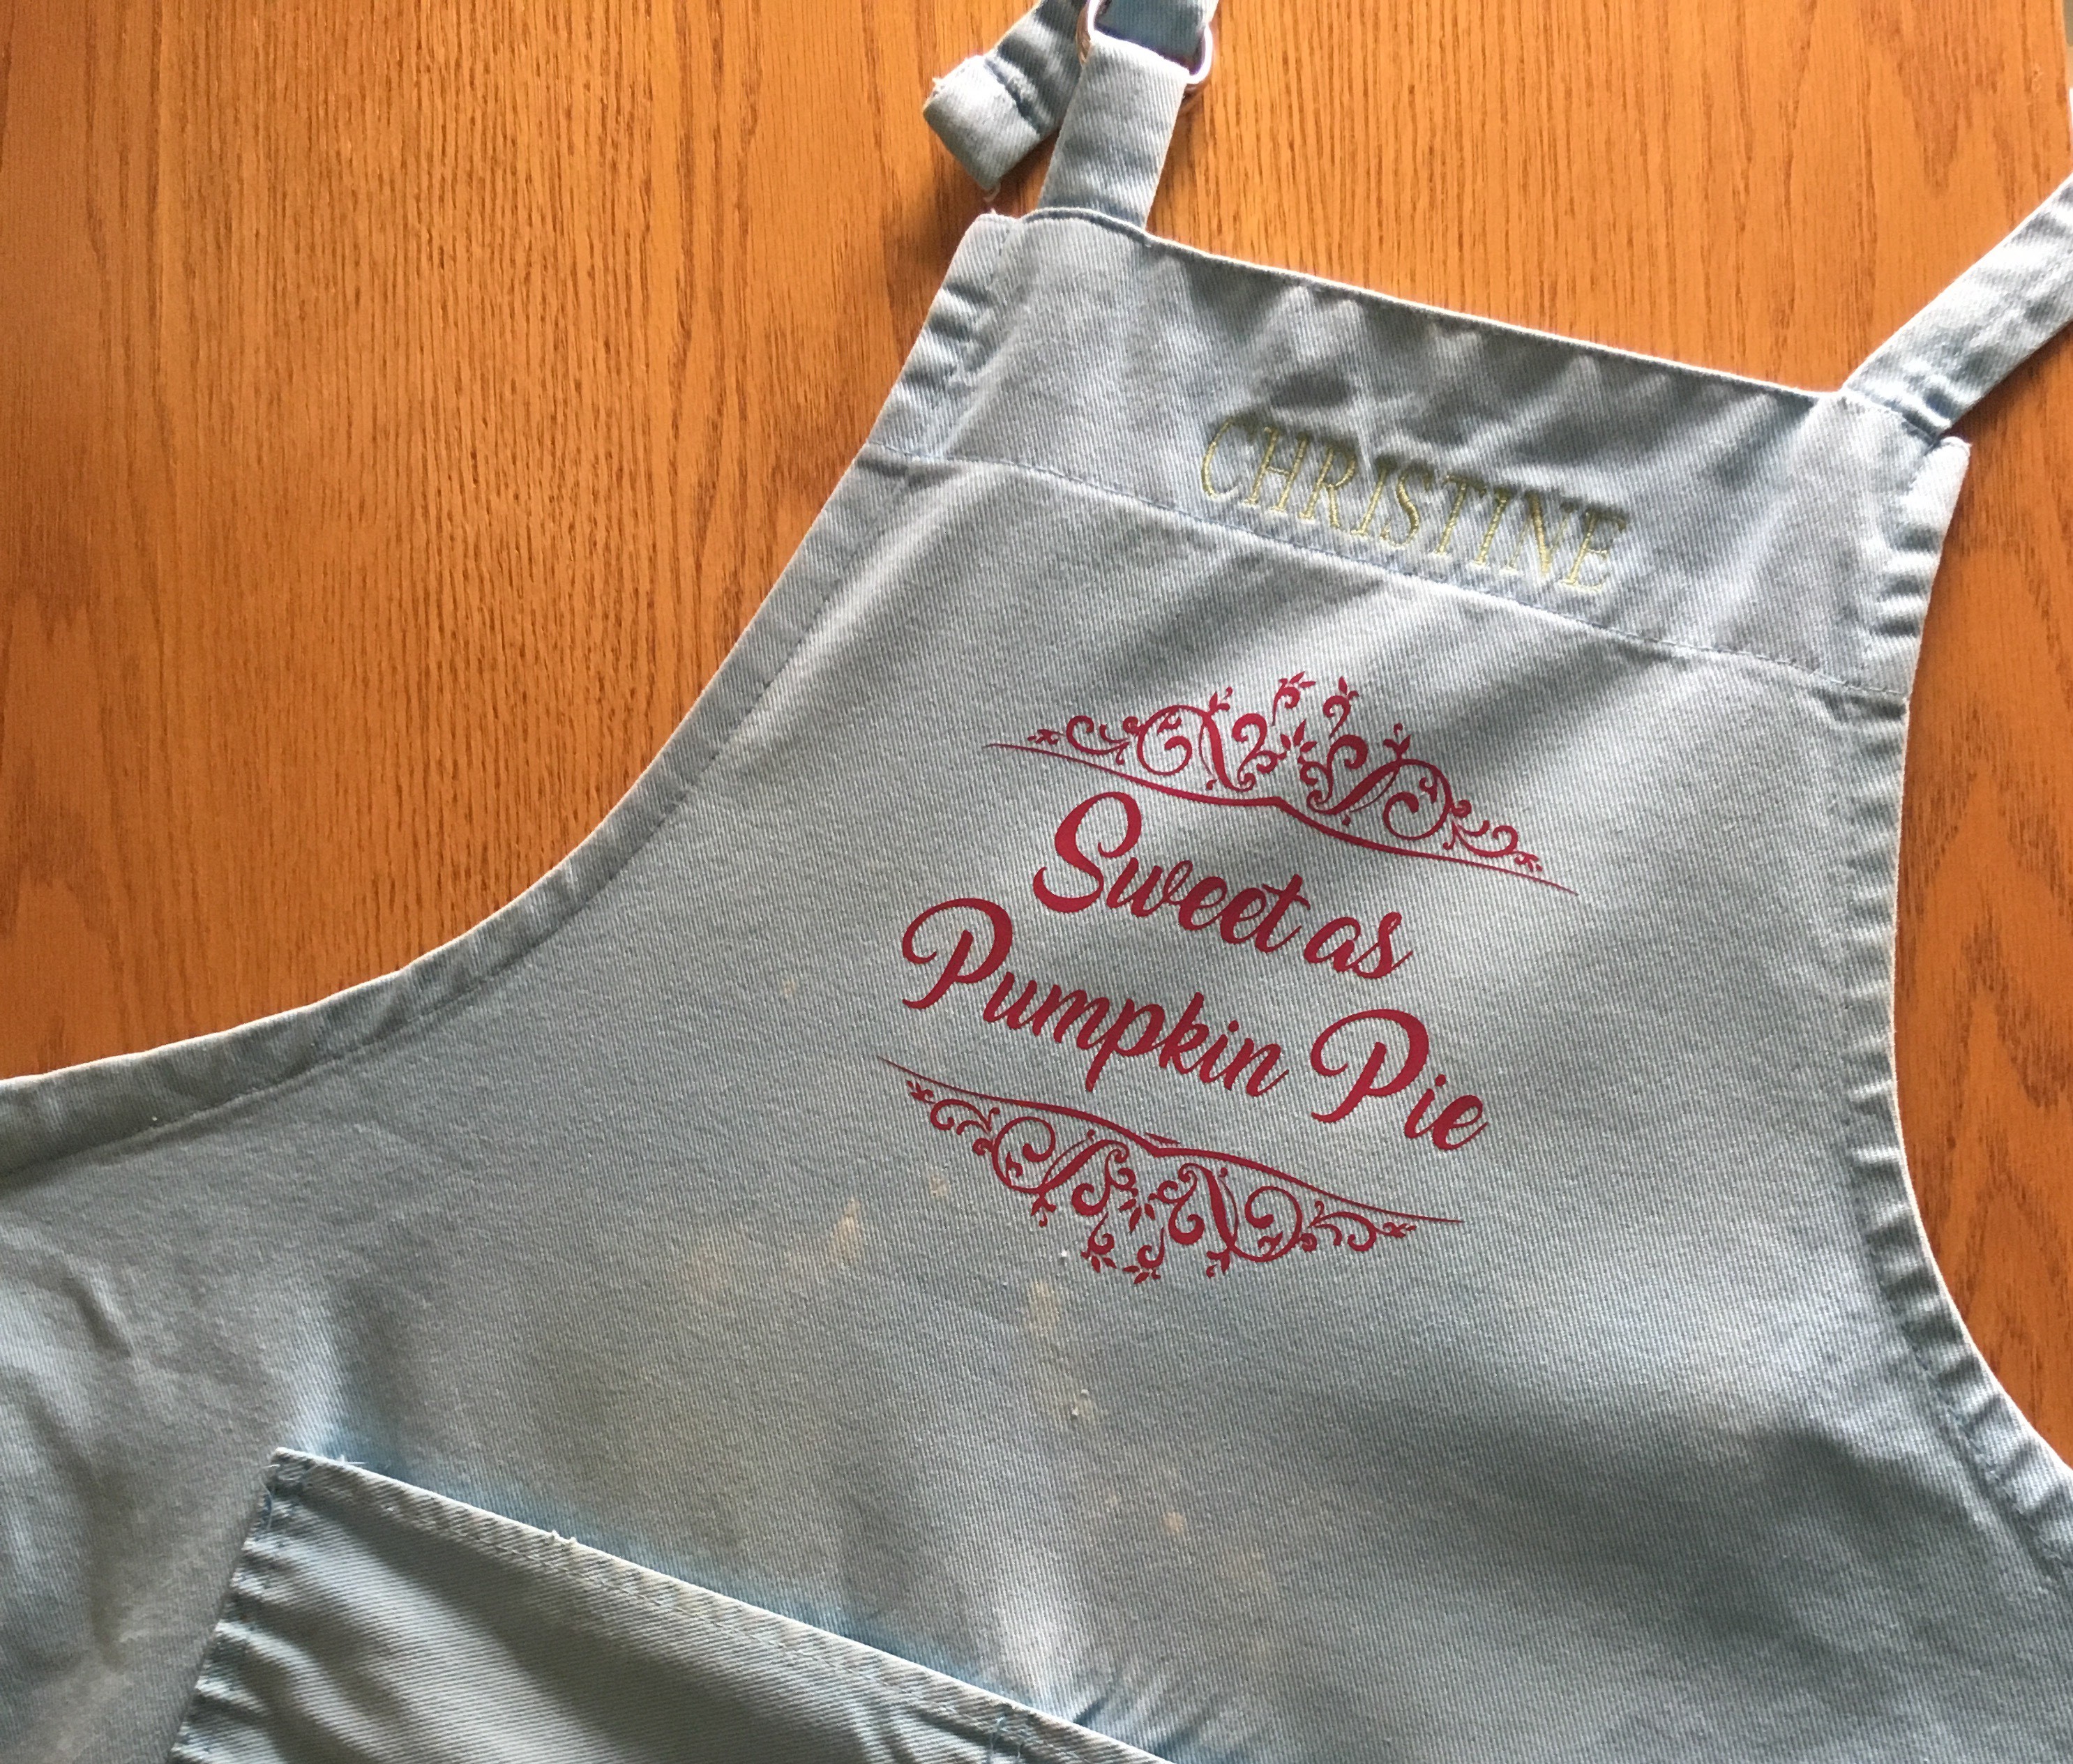 Apron with deccoration that reads "Sweet as Pumpkin Pie"